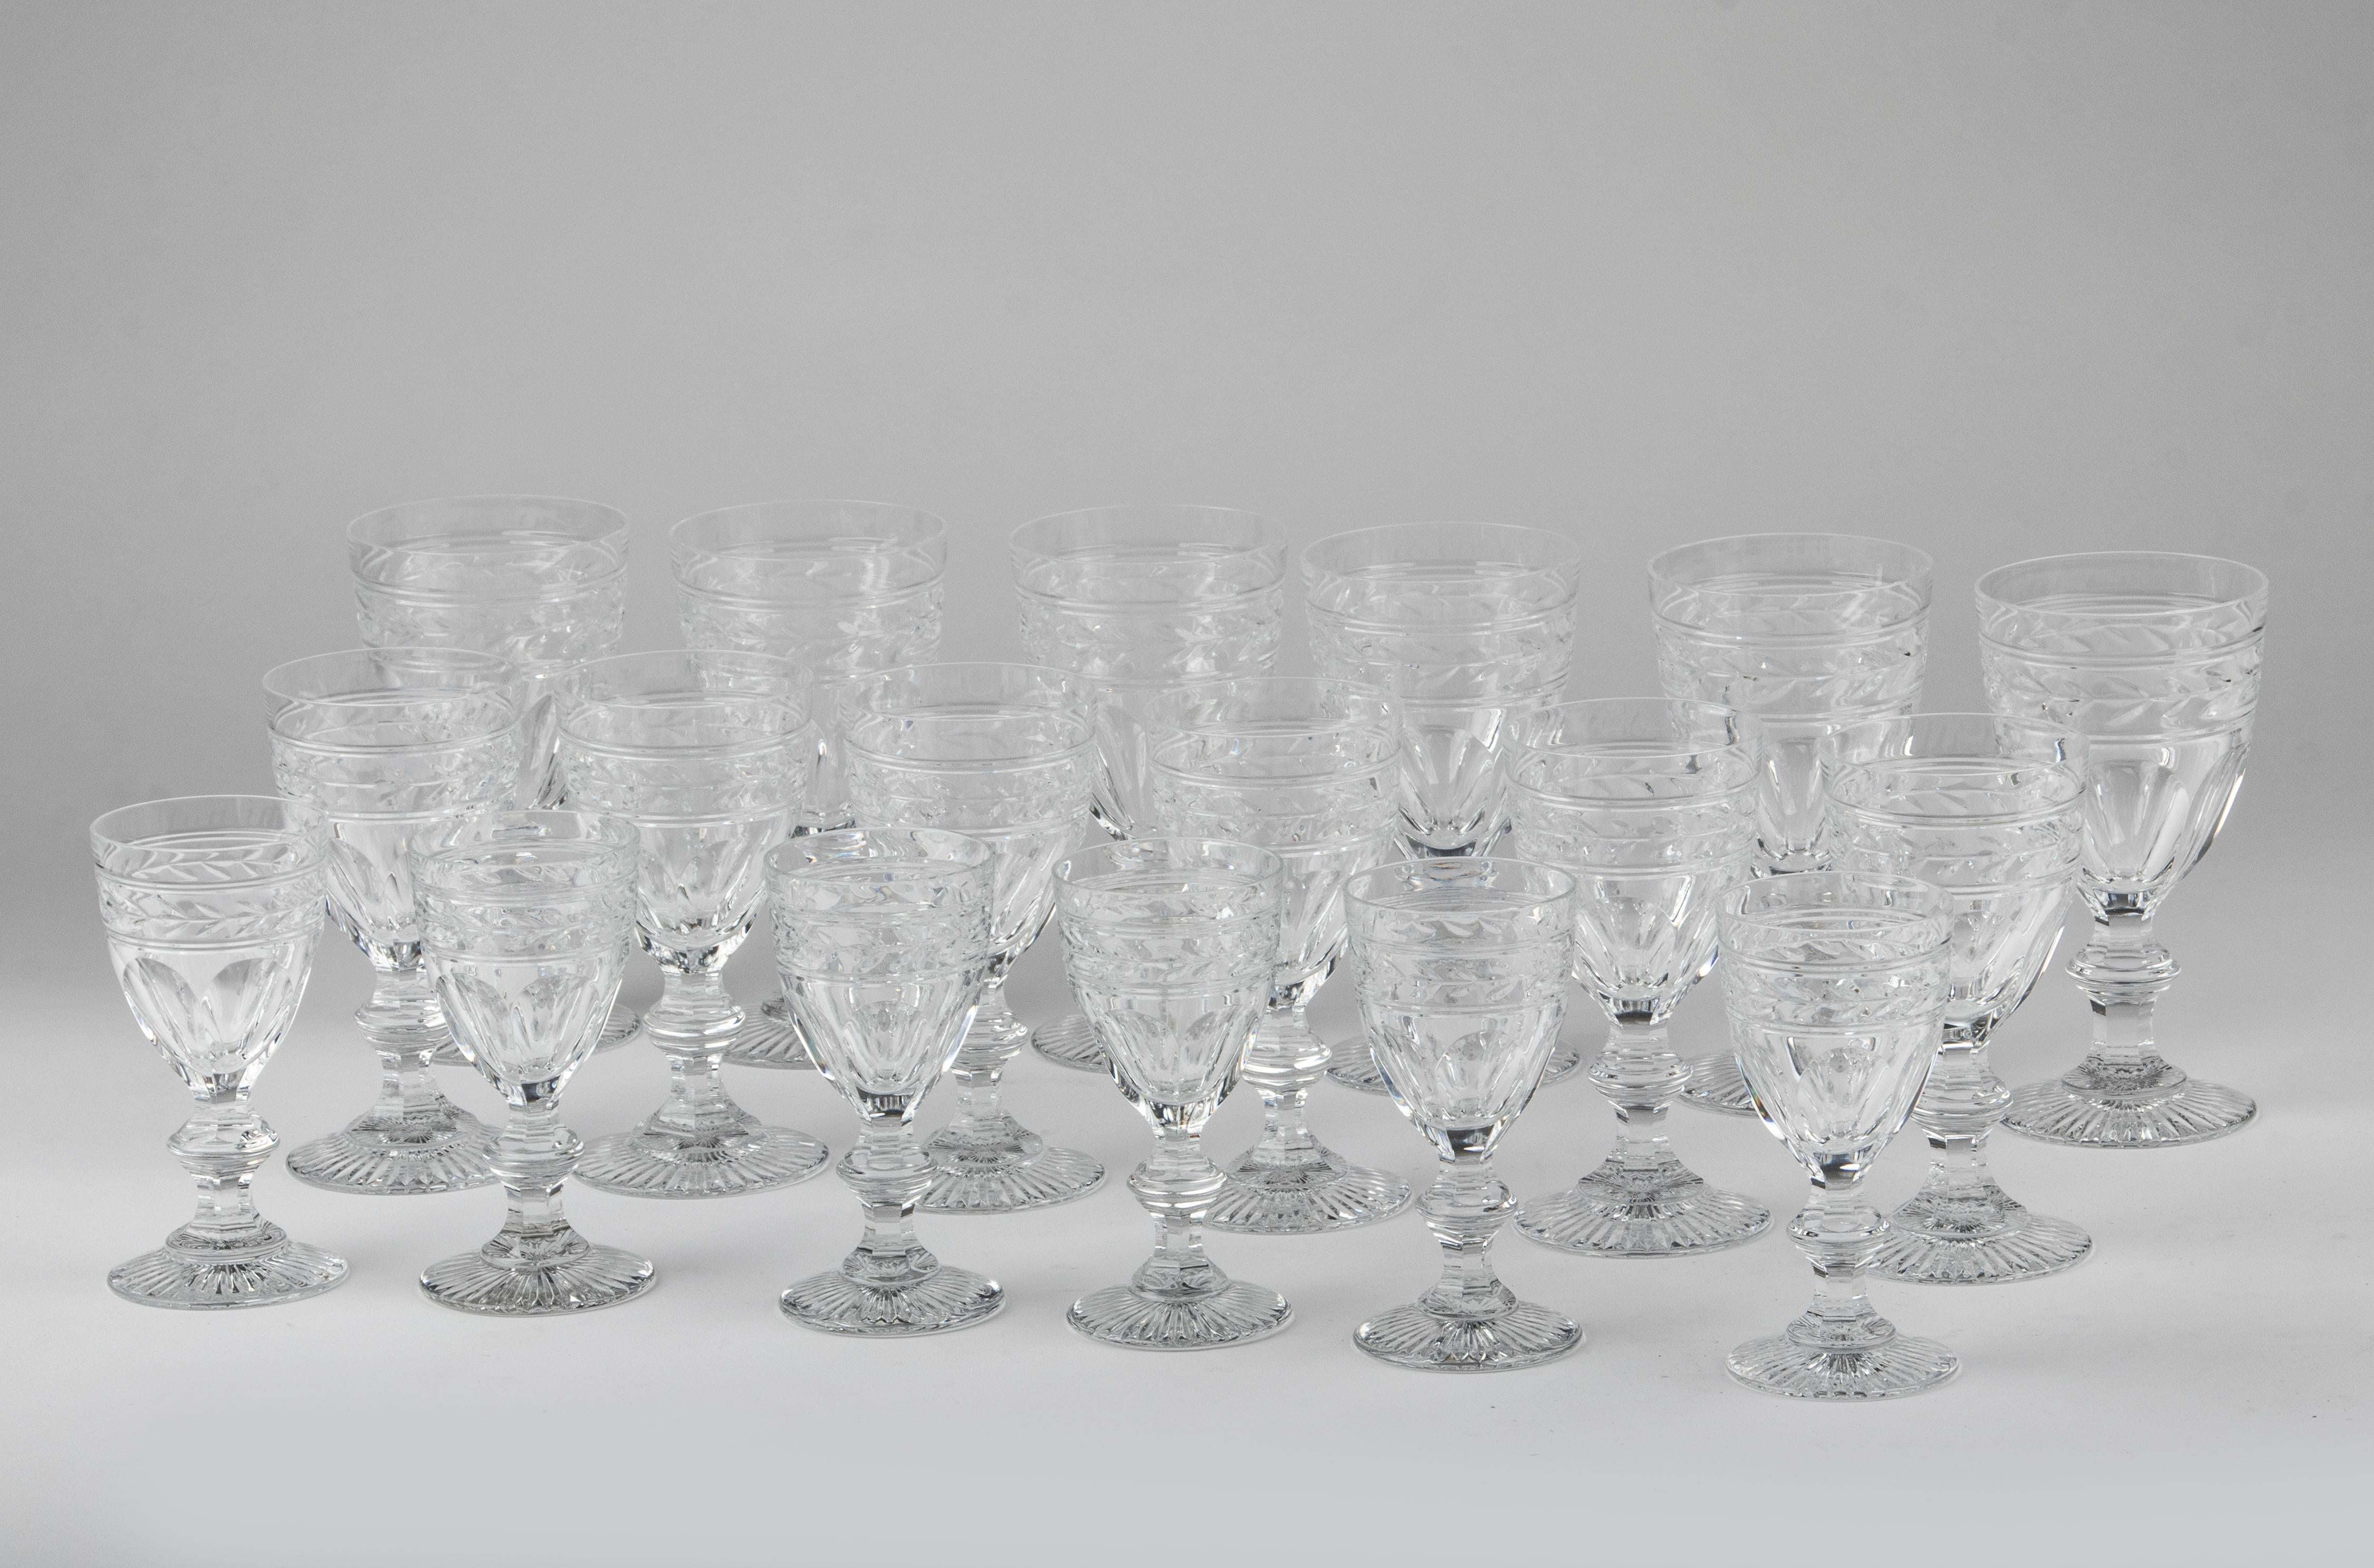 where is baccarat crystal made